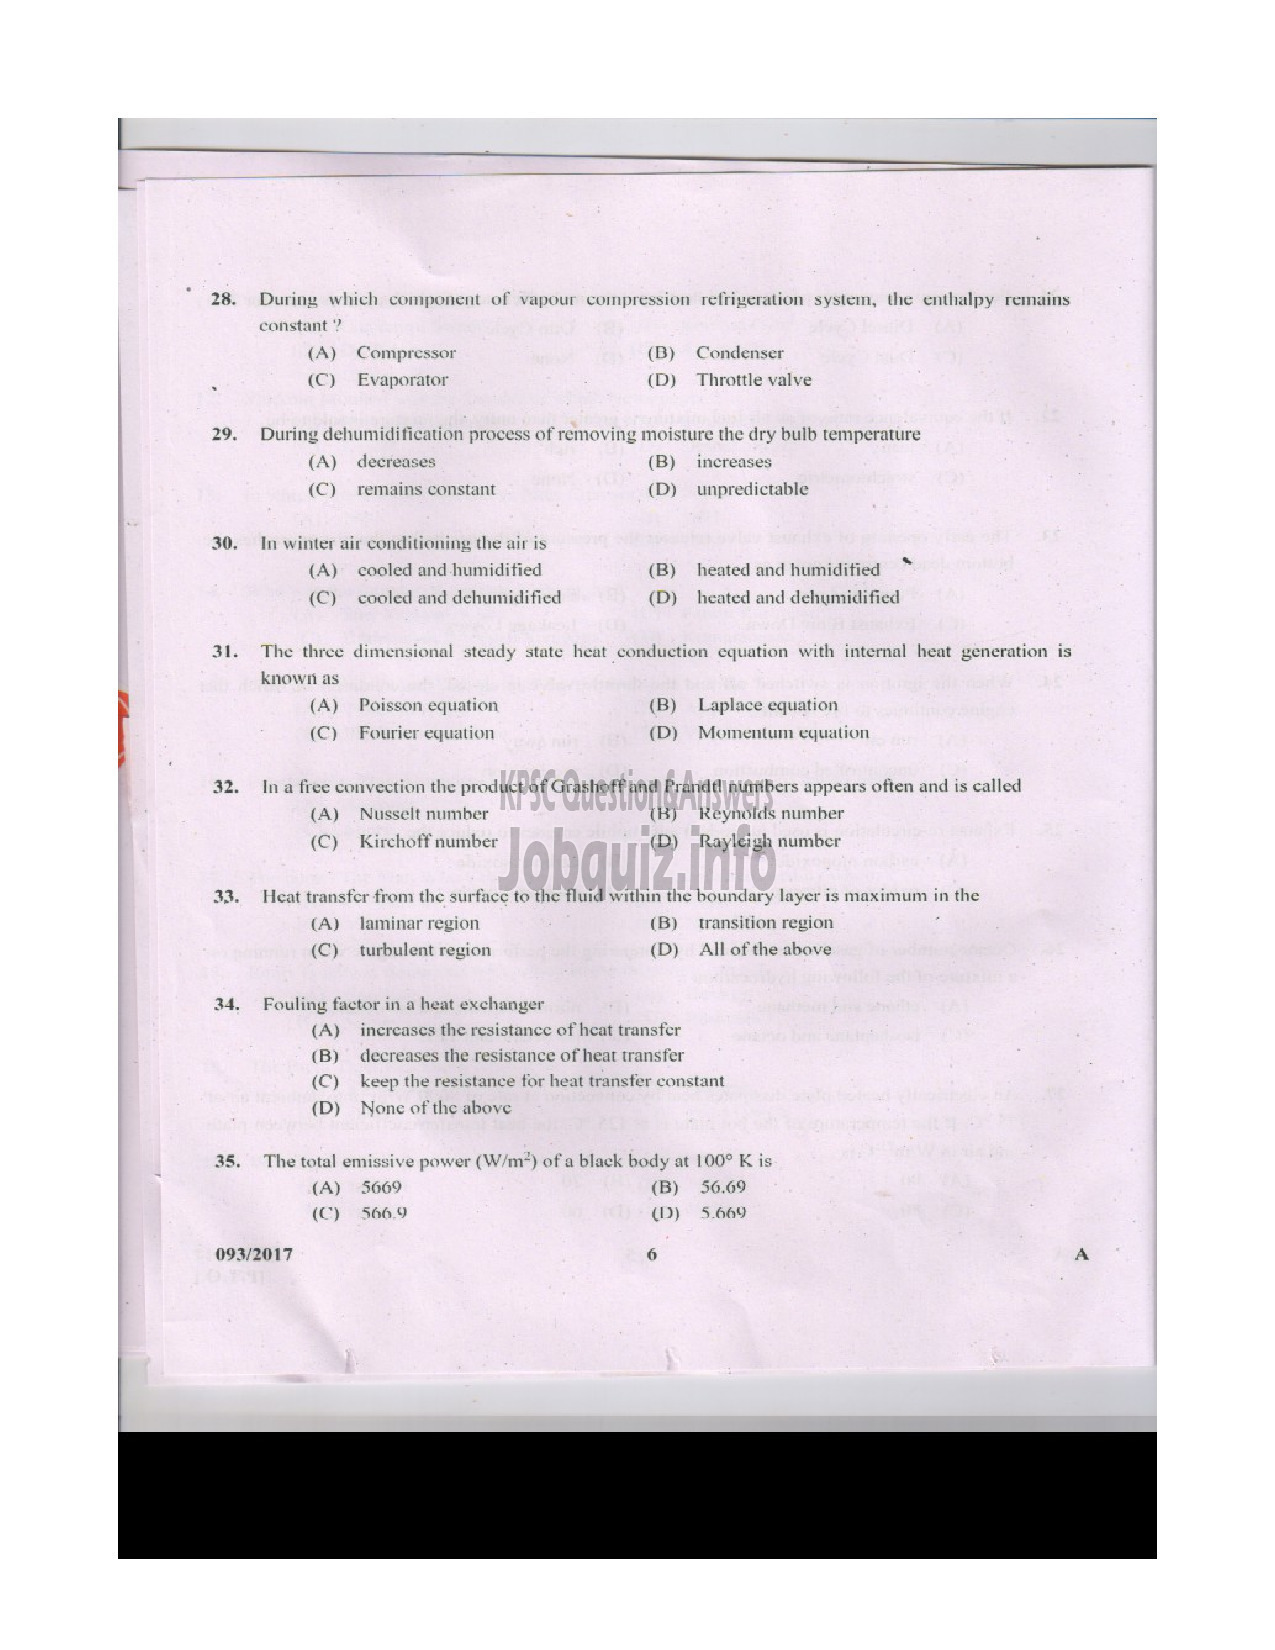 Kerala PSC Question Paper - INSTRUCTOR GRADE I MECHANICAL ENGINEERING ENGINEERING COLLEGES-5